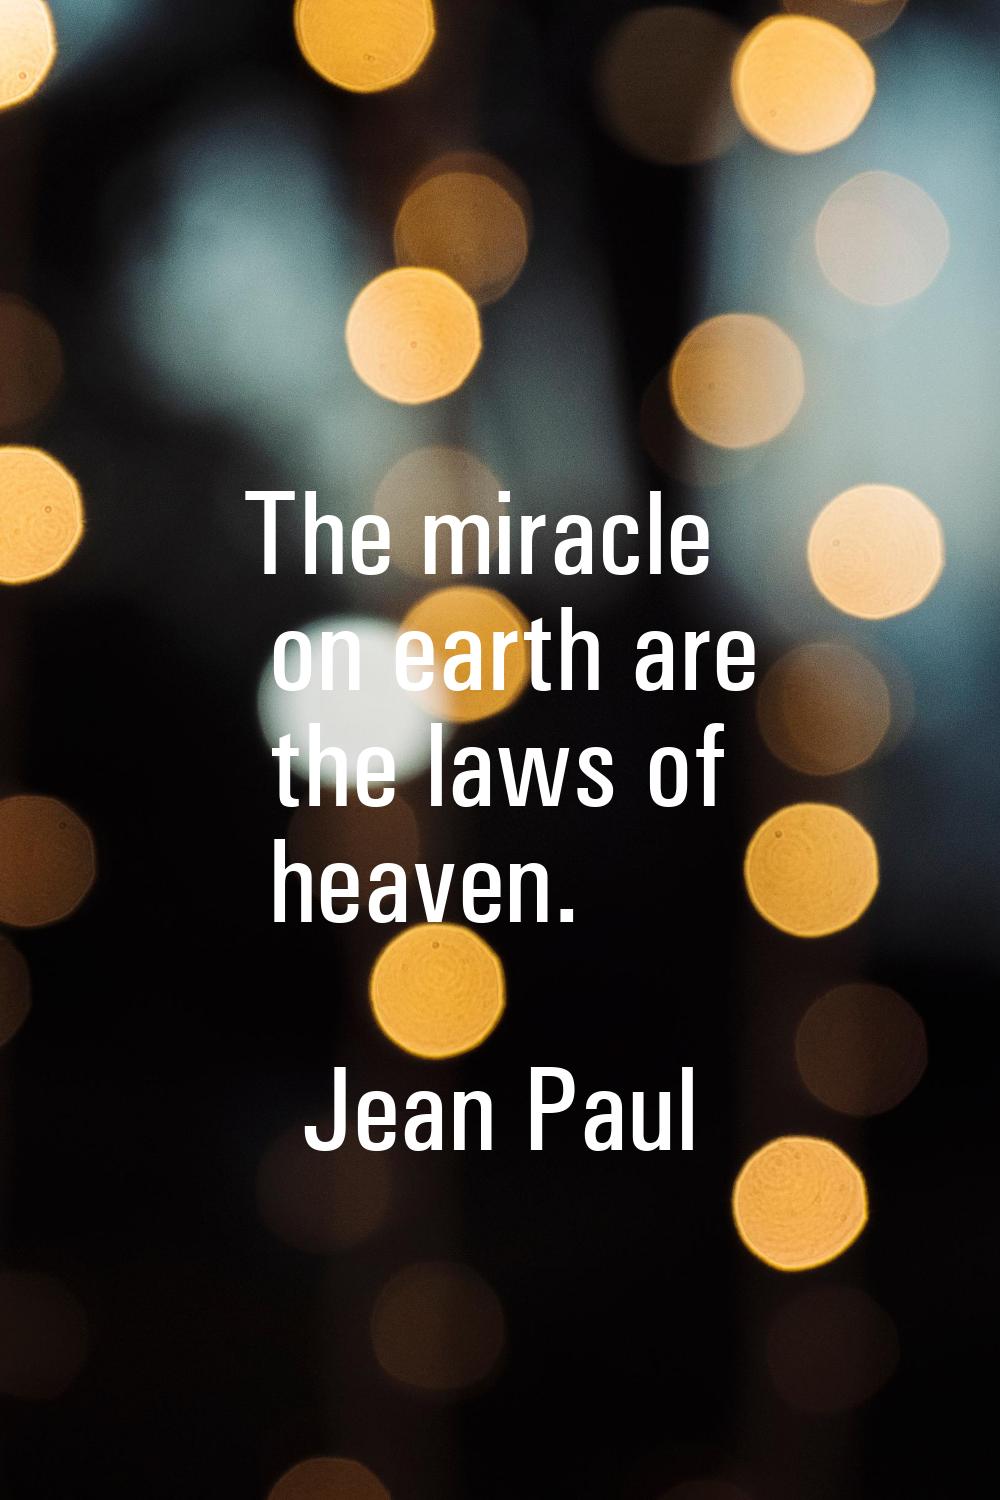 The miracle on earth are the laws of heaven.